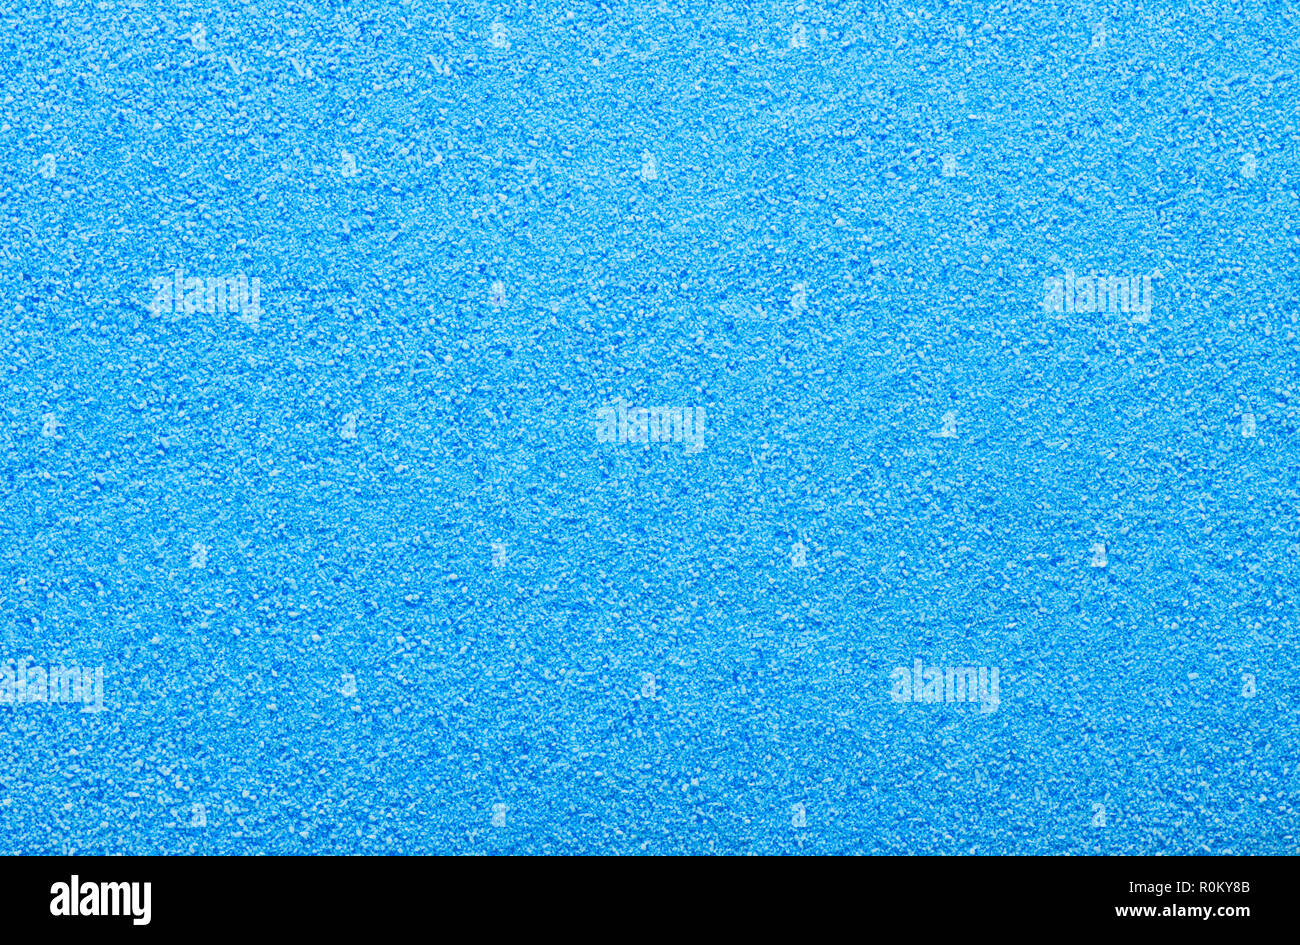 Flat Pile of Blue Sugar Grain Textured Background. Stock Photo